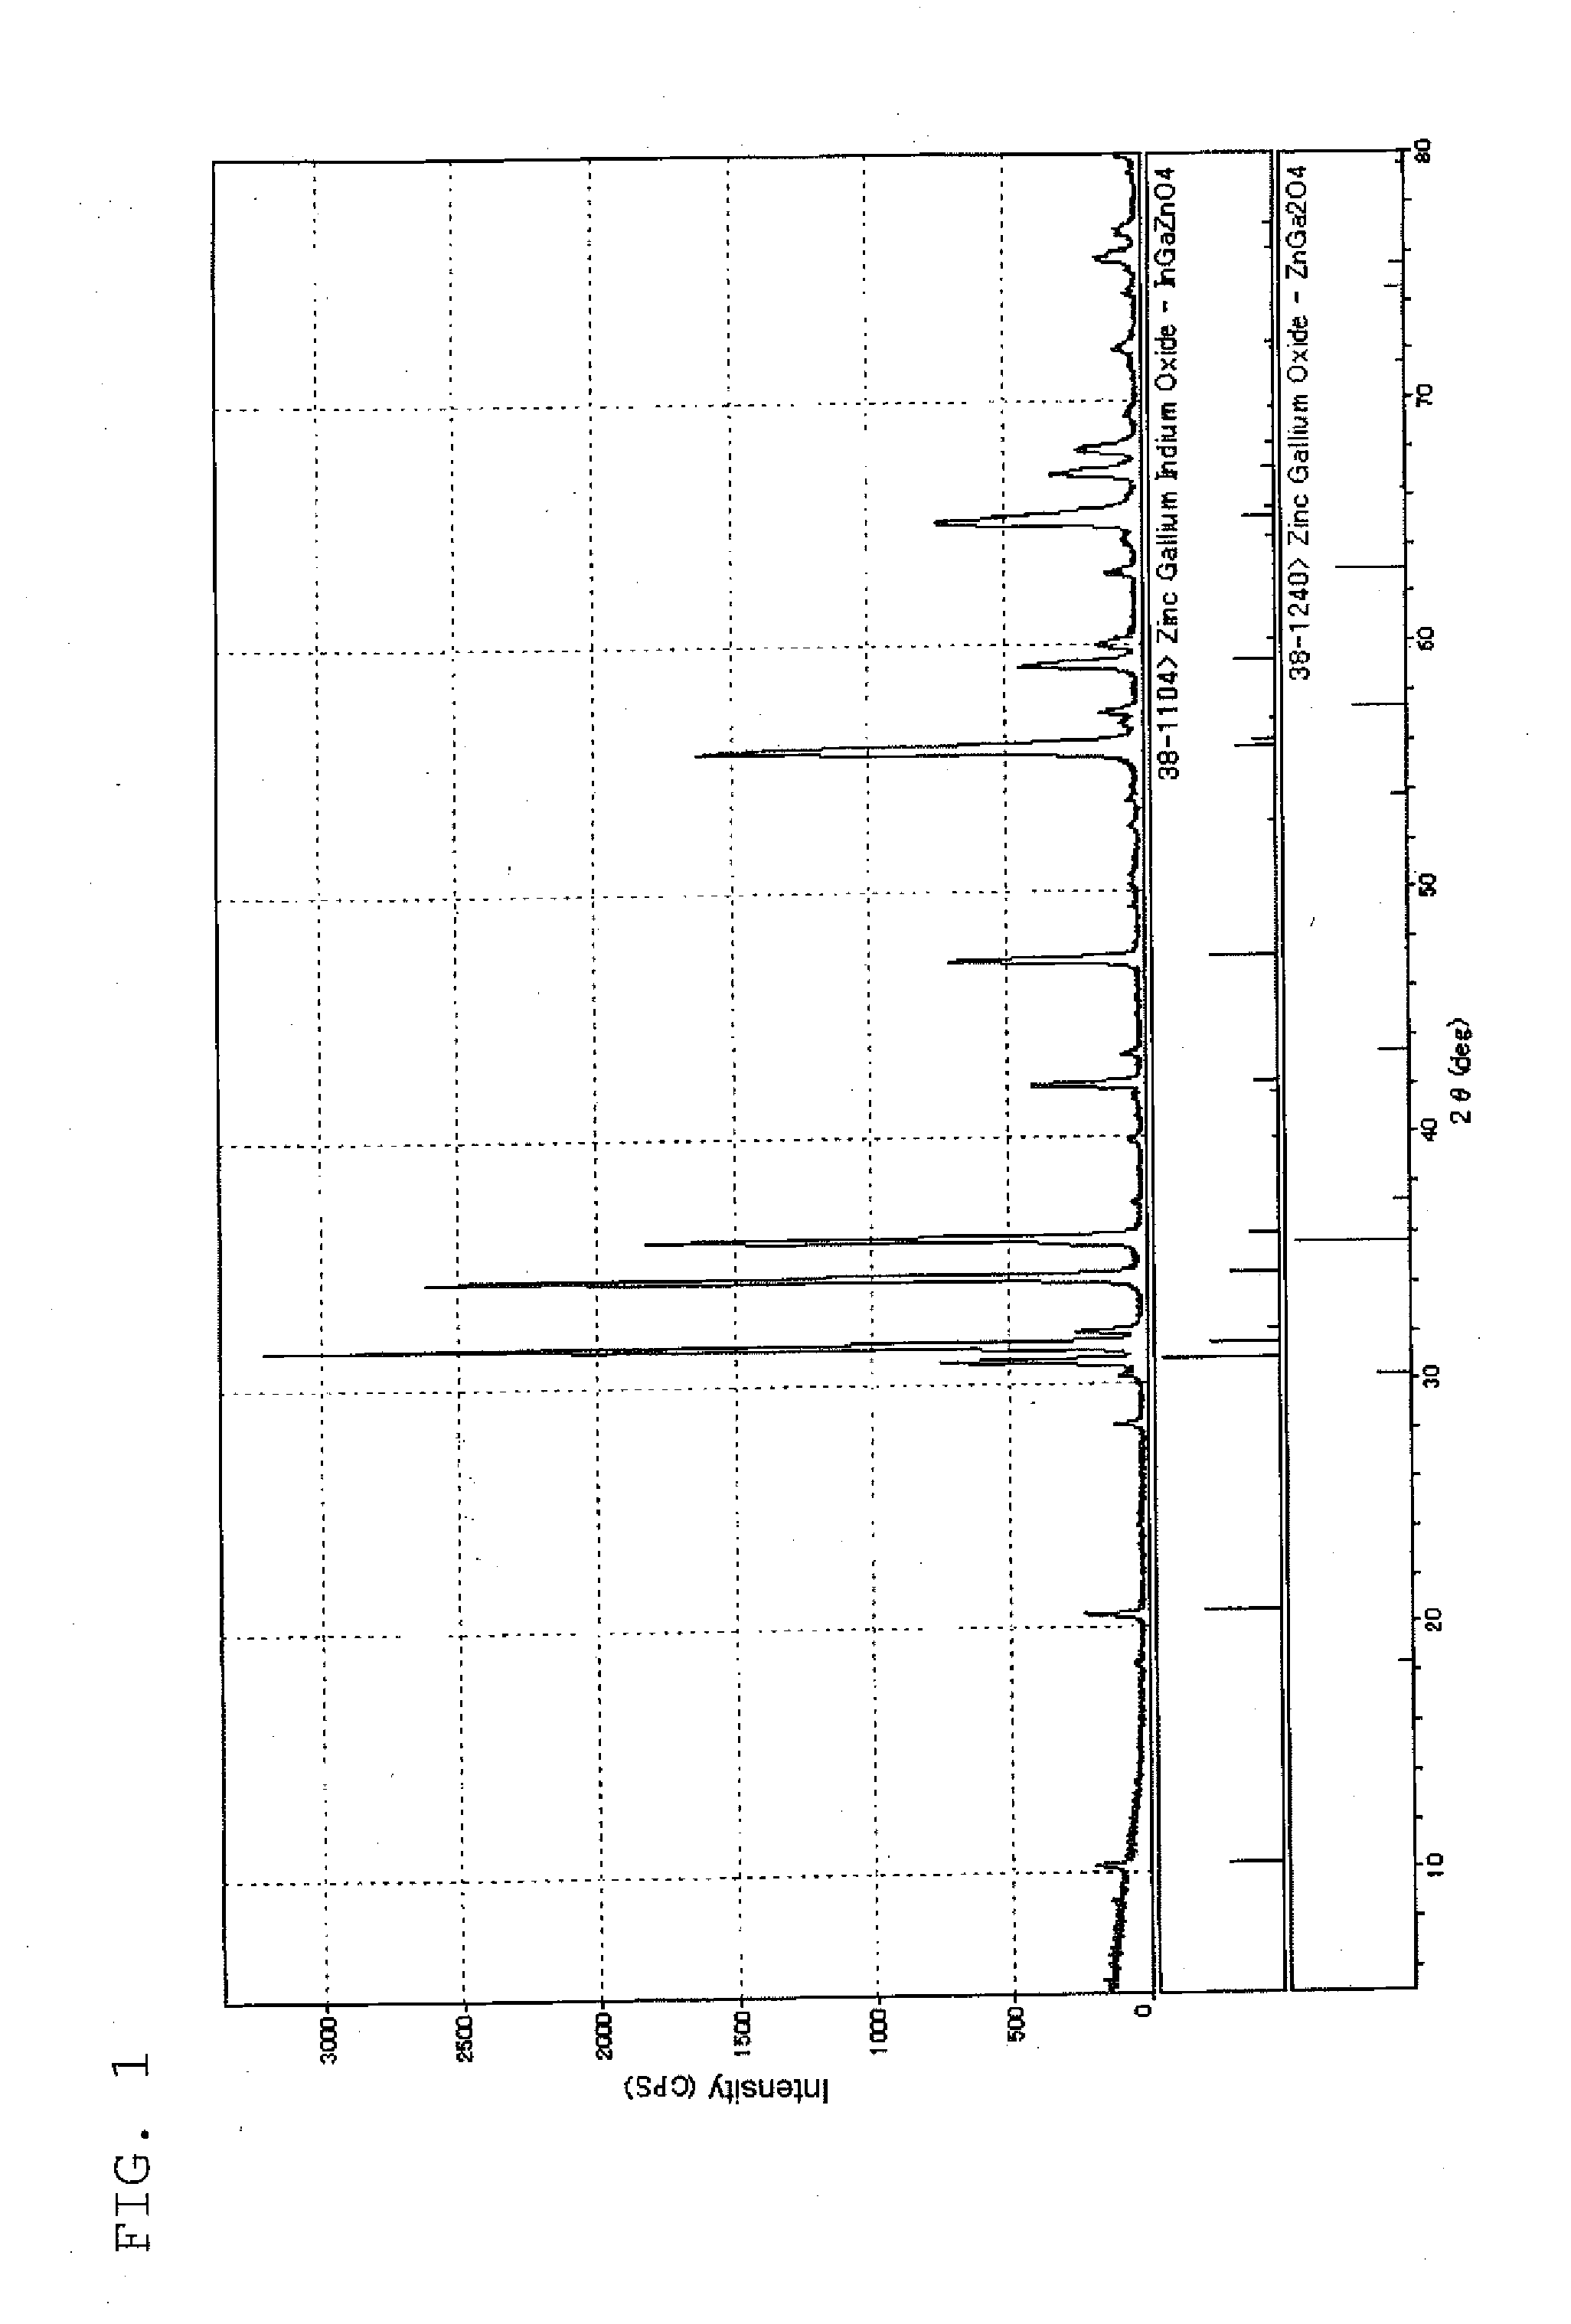 Sputtering Target and Oxide Semiconductor Film